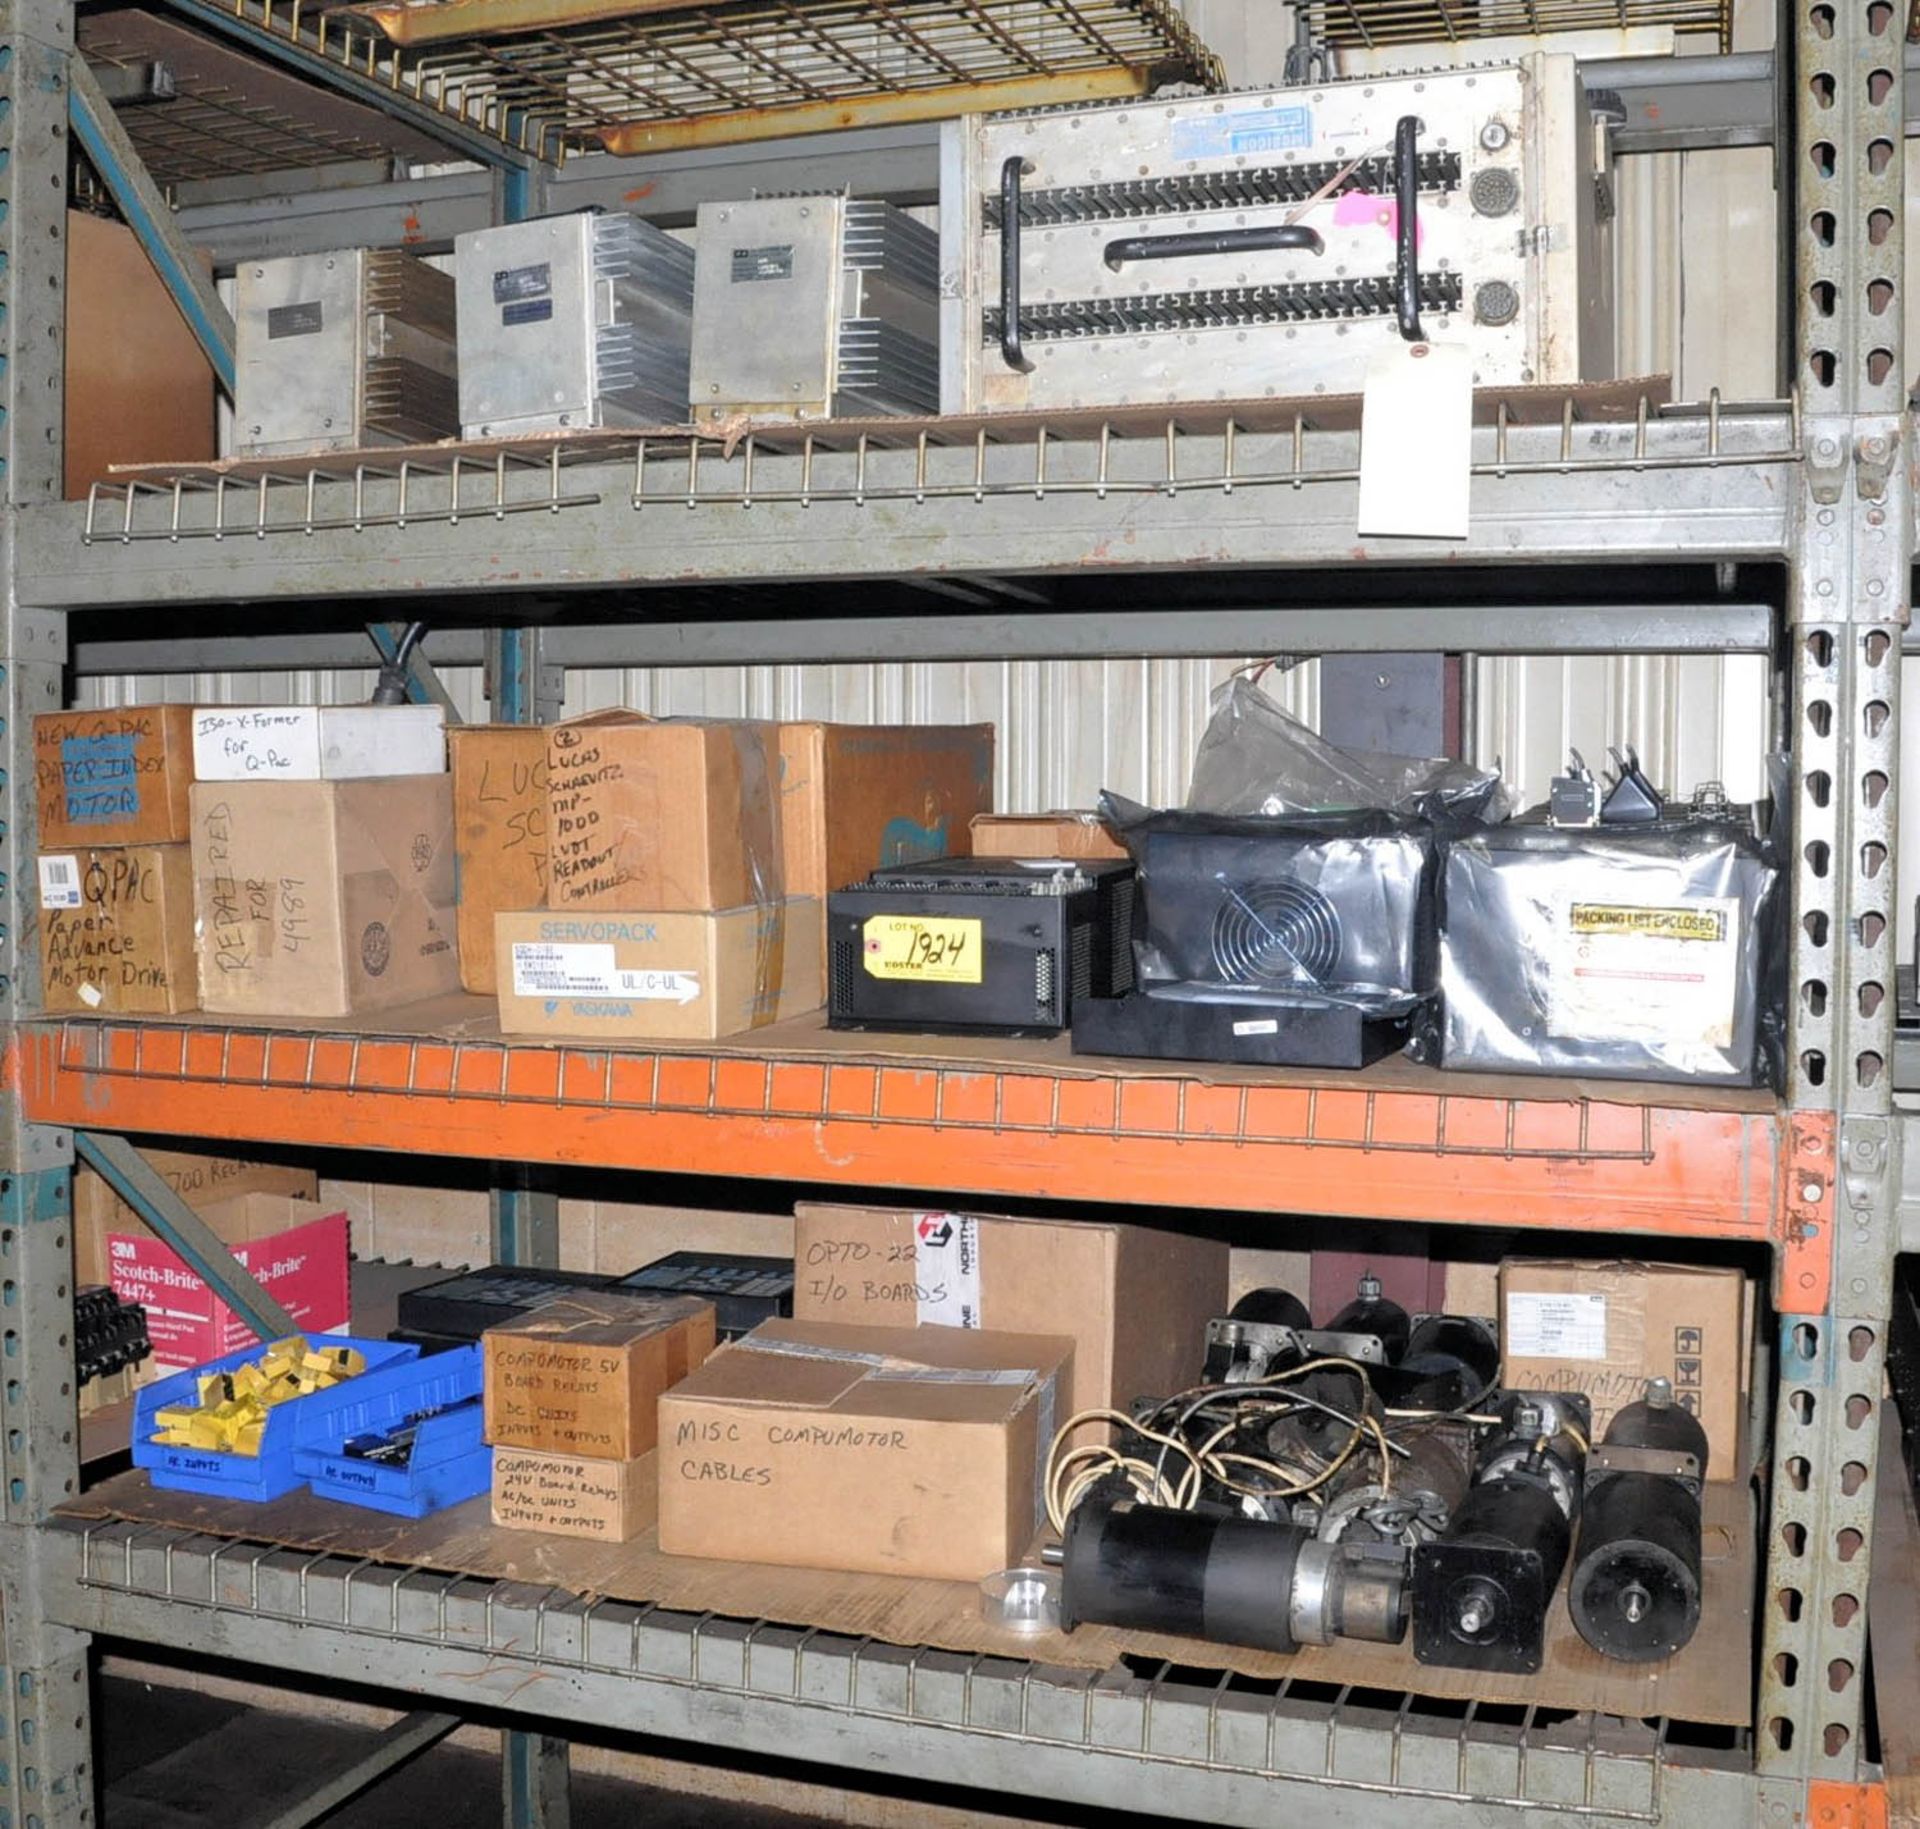 MODICON, DATAPOWER, COMPUMOTOR COMPONENTS, ETC. IN (1) SECTION, (SHELVING NOT INCLUDED), (BOX ROOM-